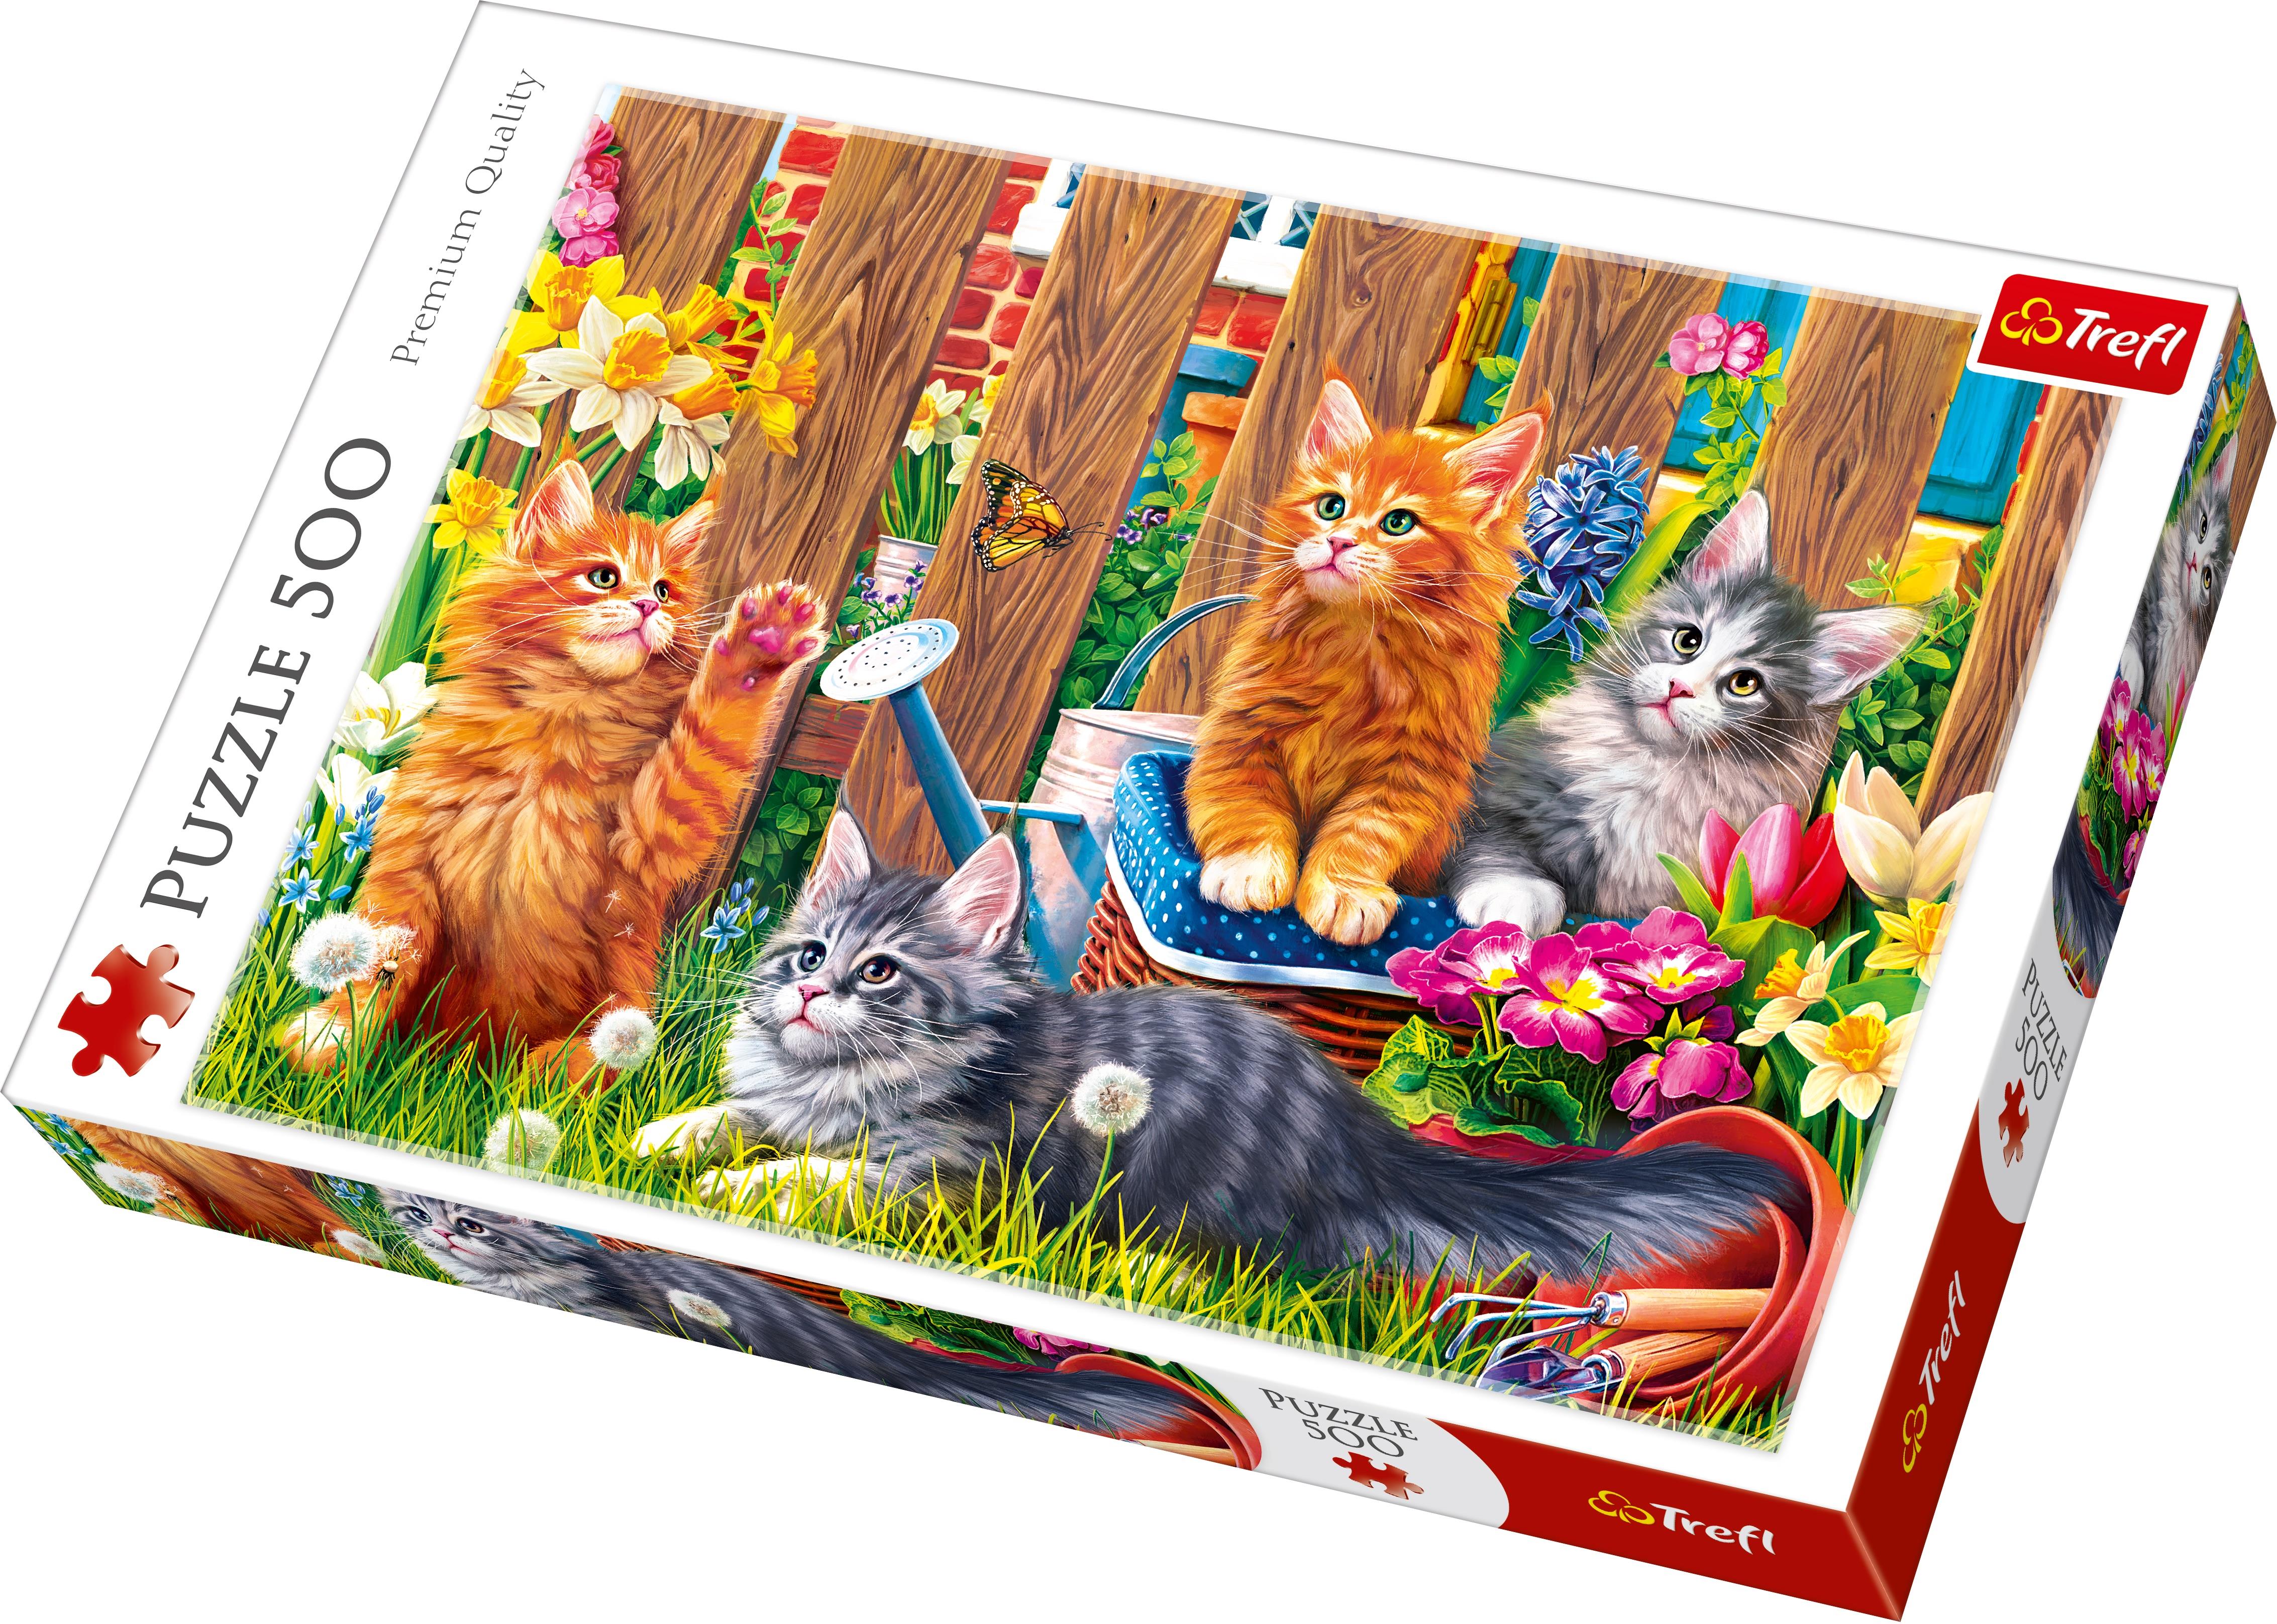 Trefl Puzzle 37326 Kittens İn The Gard 500 Parça Puzzle